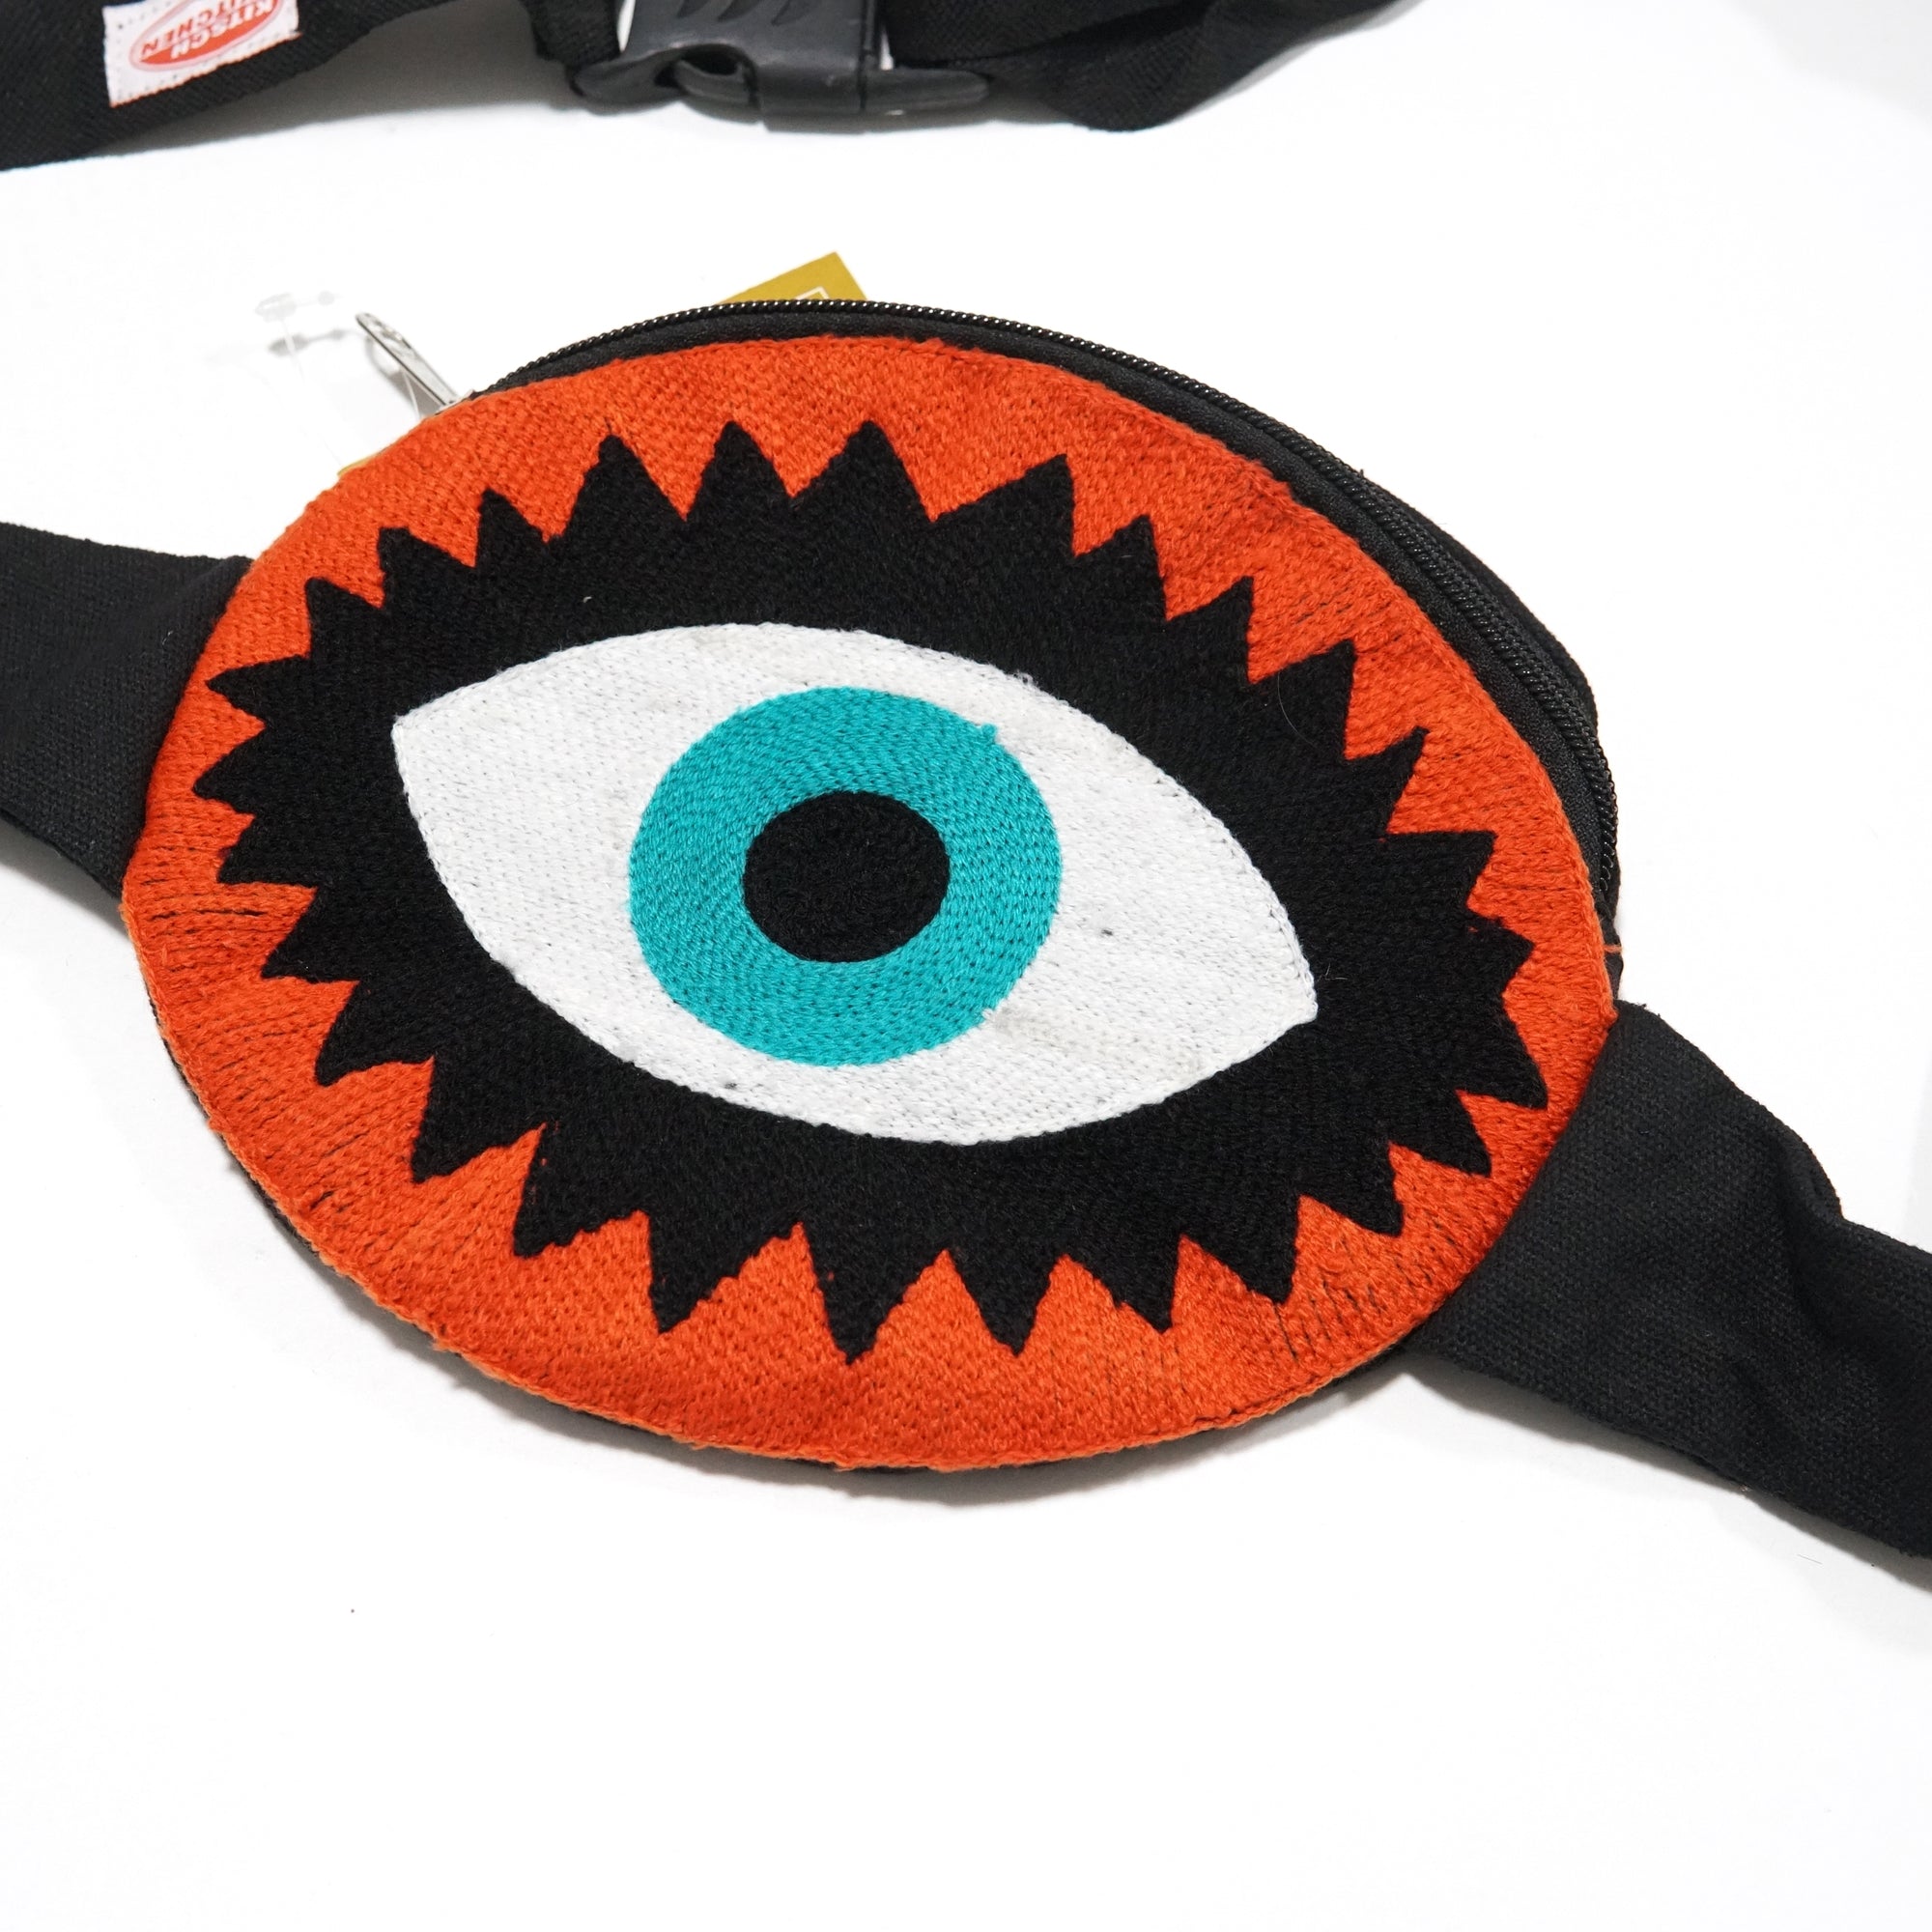 No:AC209 | Name:Fanny Pack Eye | Color: embroidere【KITSCH KITCHEN_キッチュキッチン】【ネコポス選択可能】